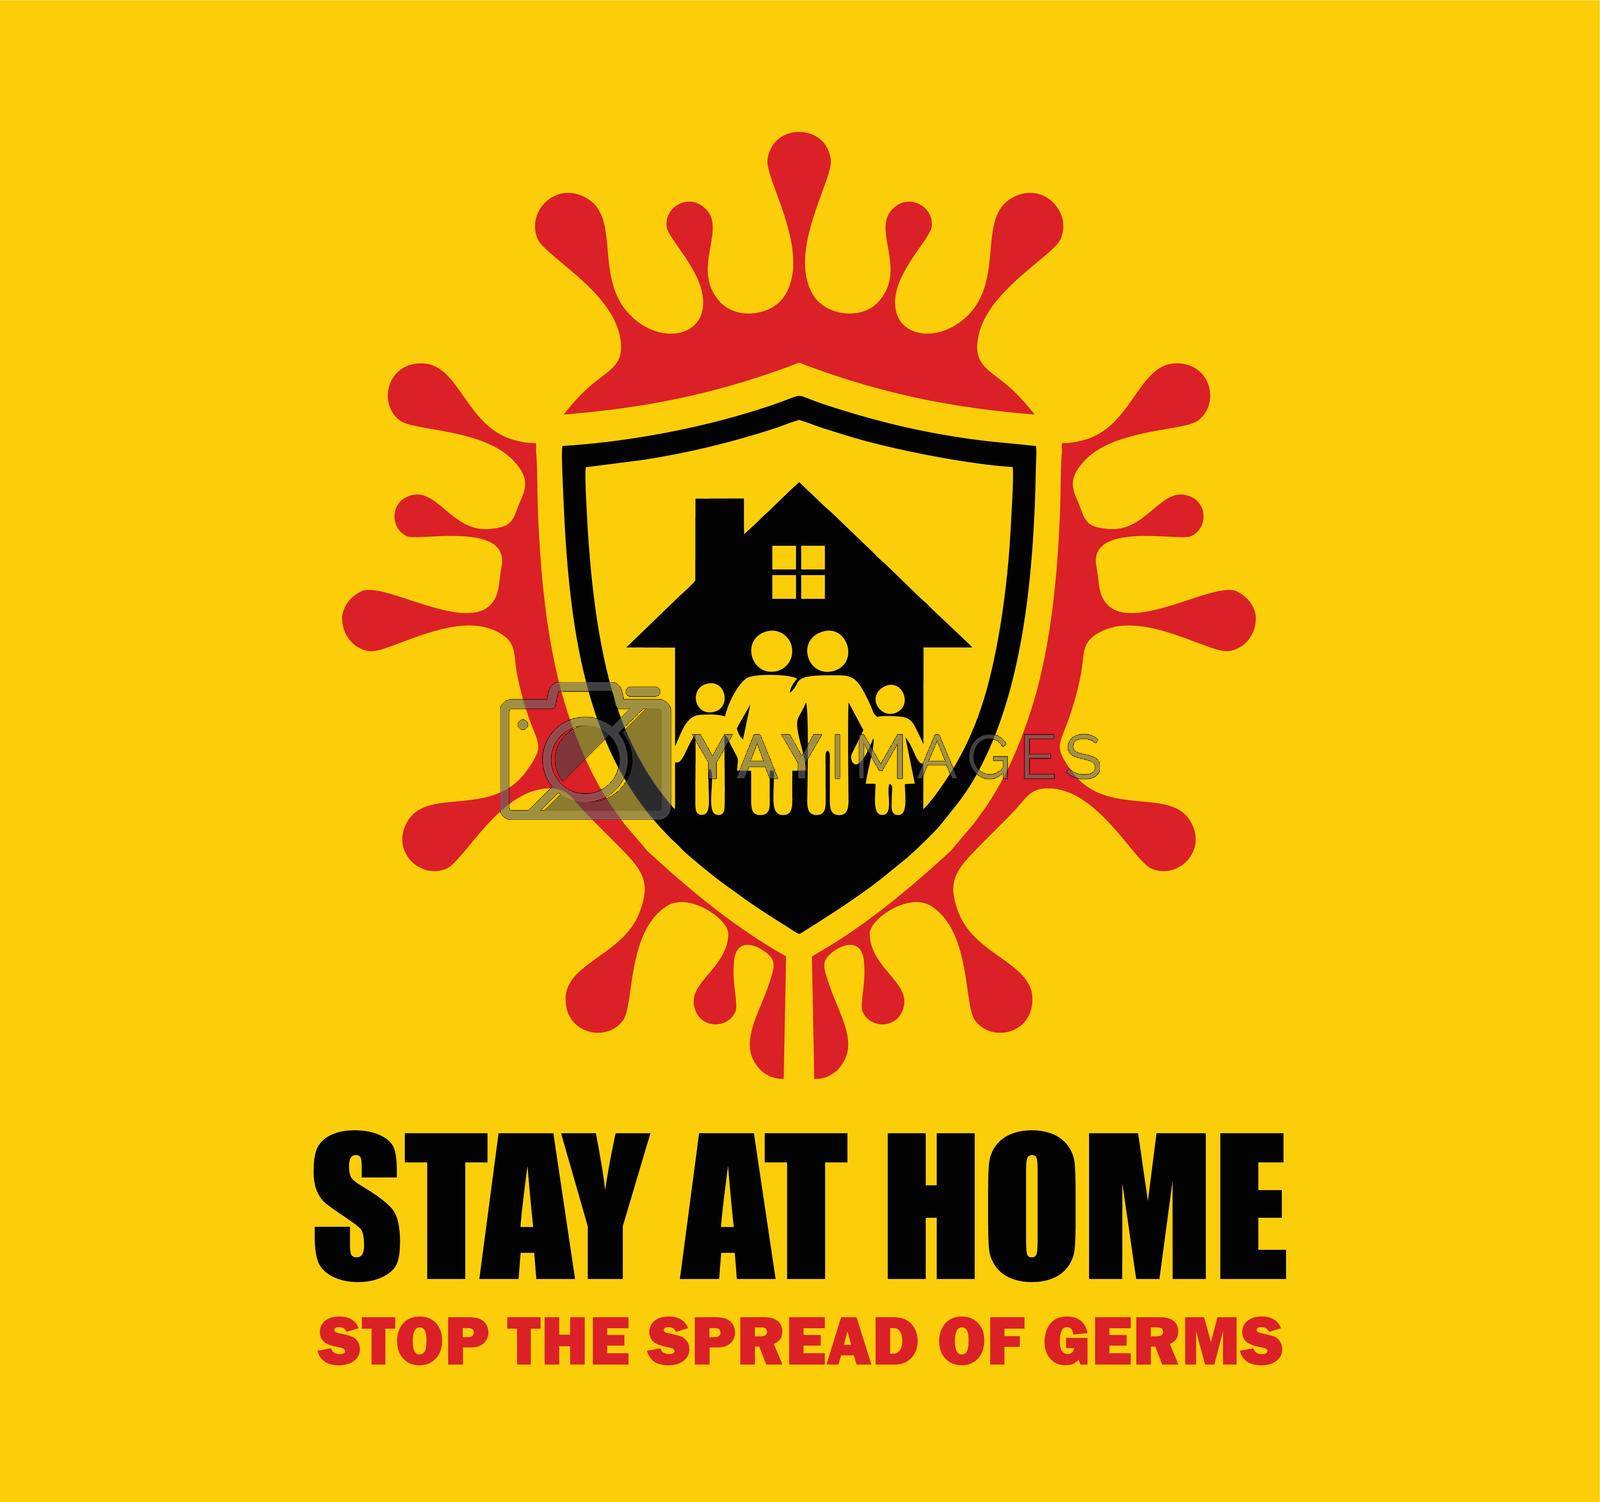 Royalty free image of Stay at home together we stop the spread of germs  by Up2date